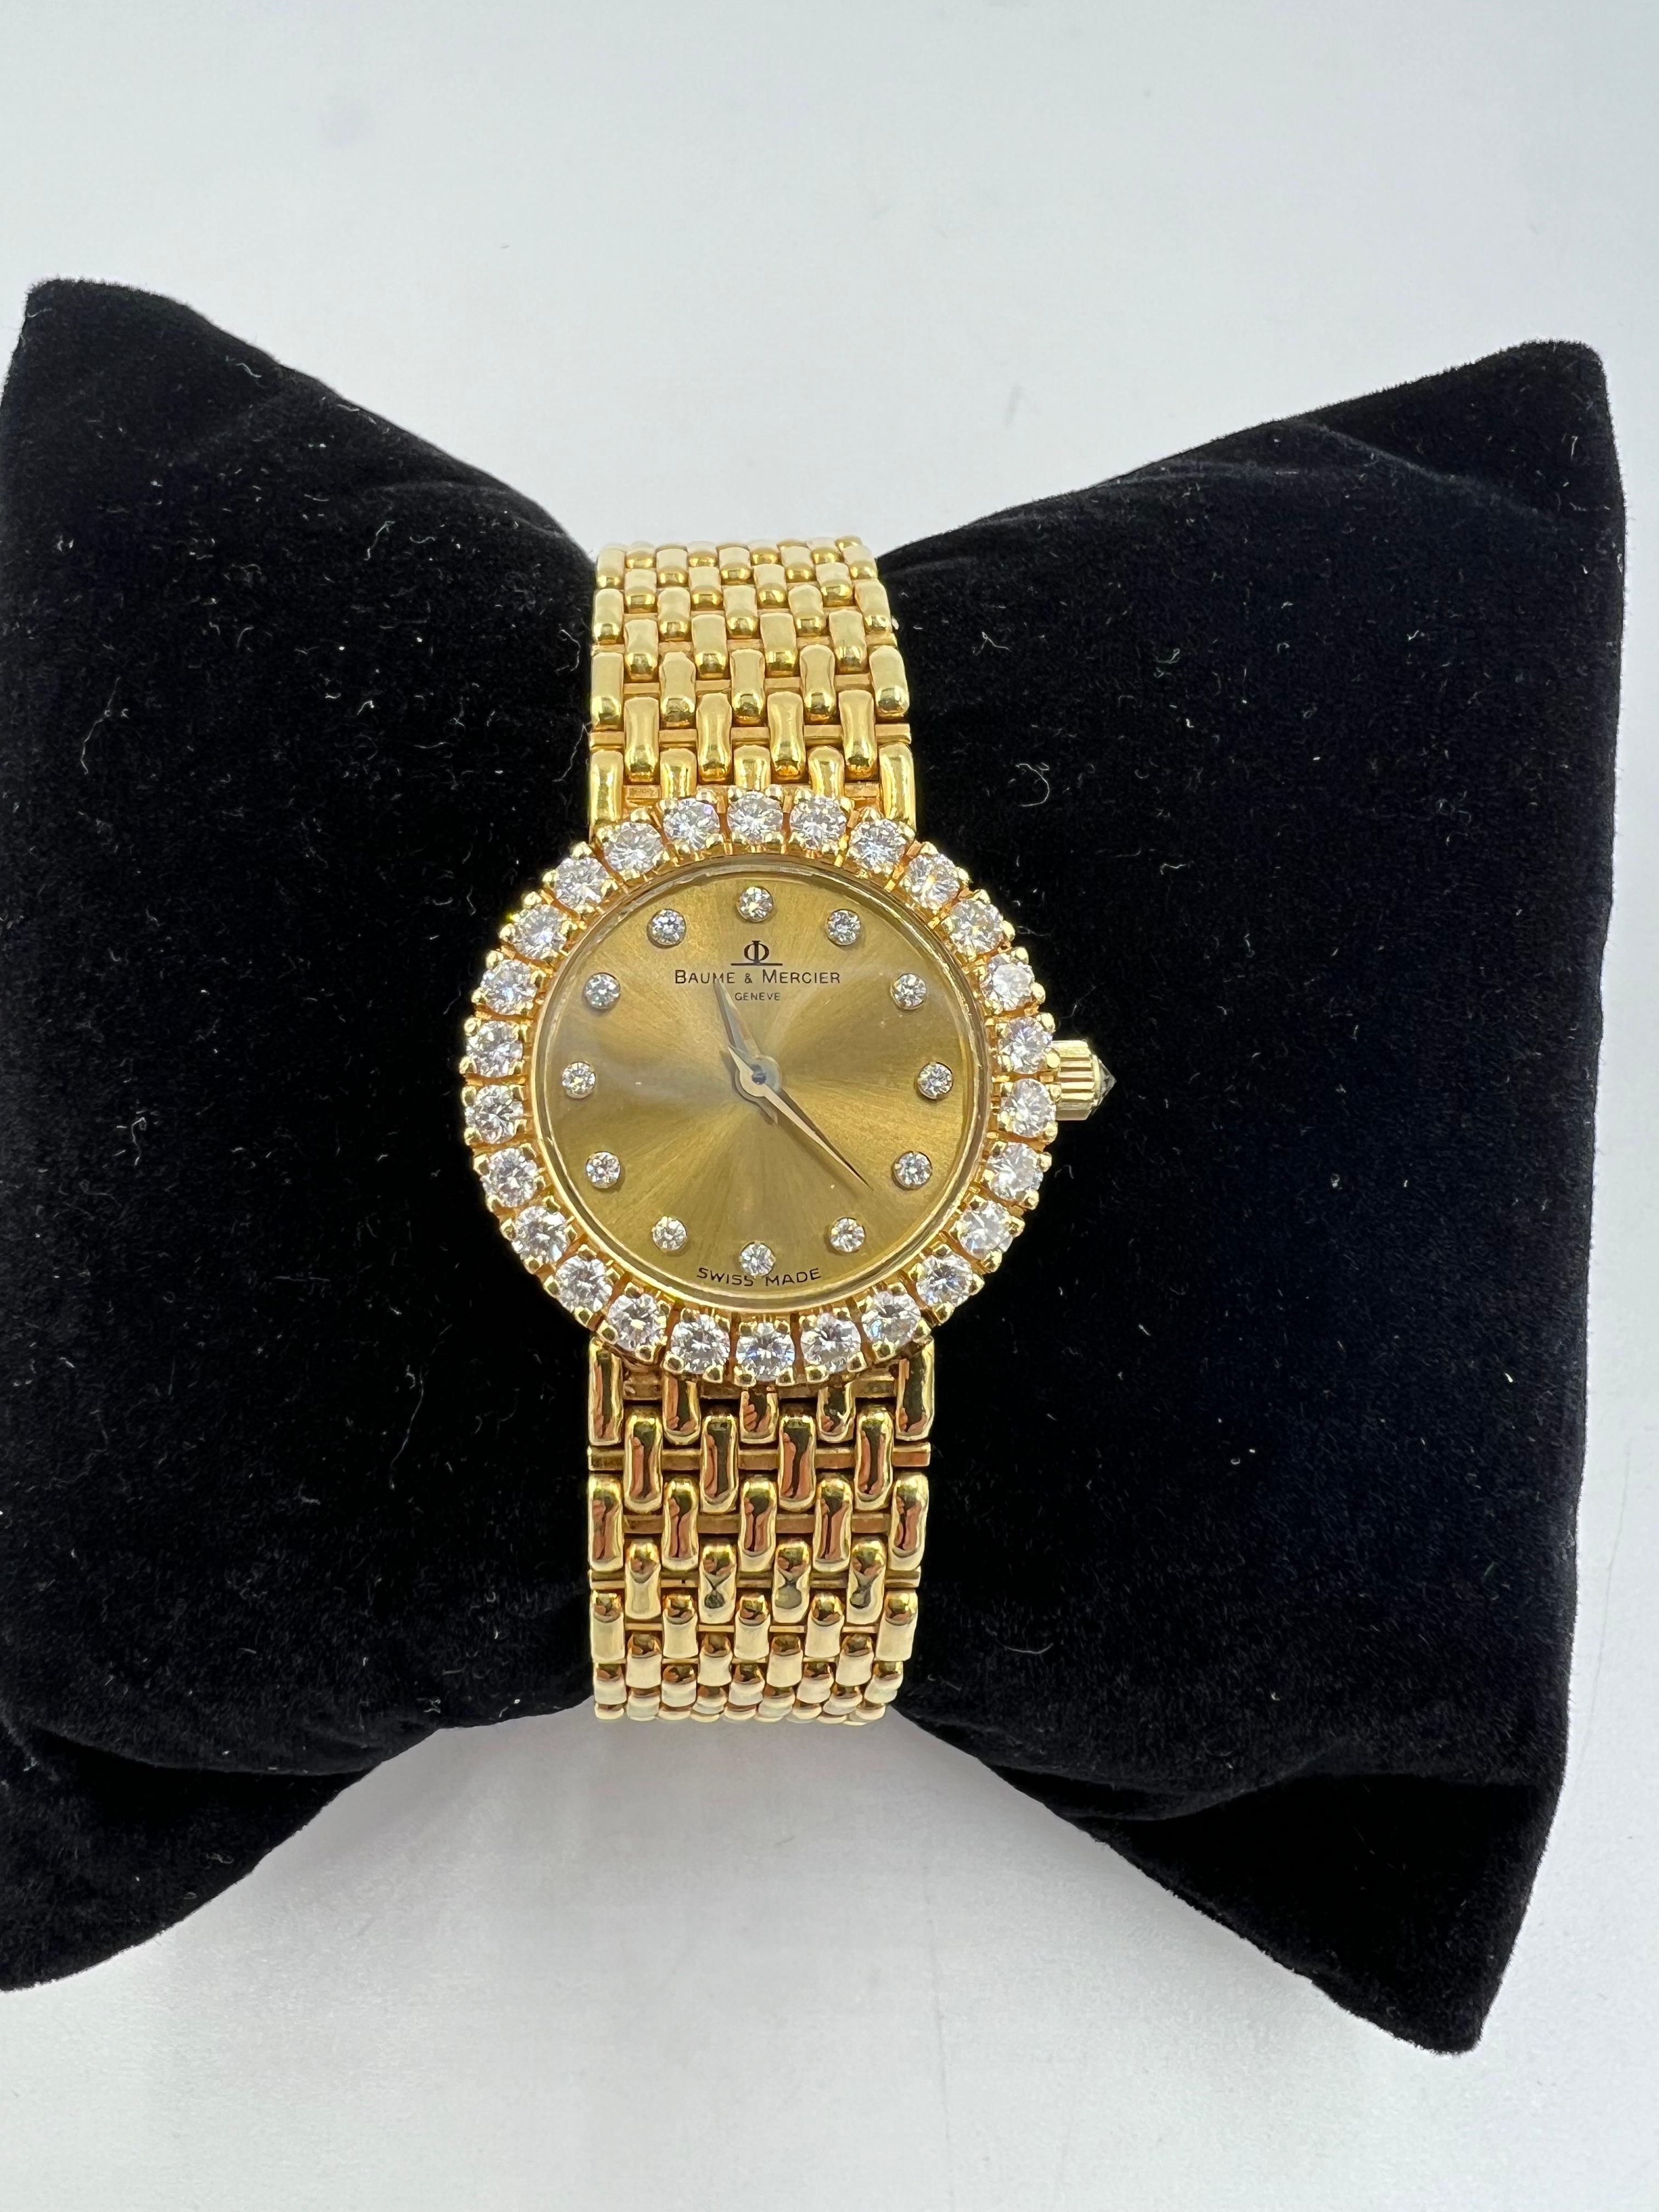 Ladies Baume & Mercier diamond yellow gold wristwatch, circa 1970s.

The Ladies Baume & Mercier Diamond Yellow Gold Wristwatch is a timeless piece of elegance and sophistication. Crafted with precision and attention to detail, this exquisite